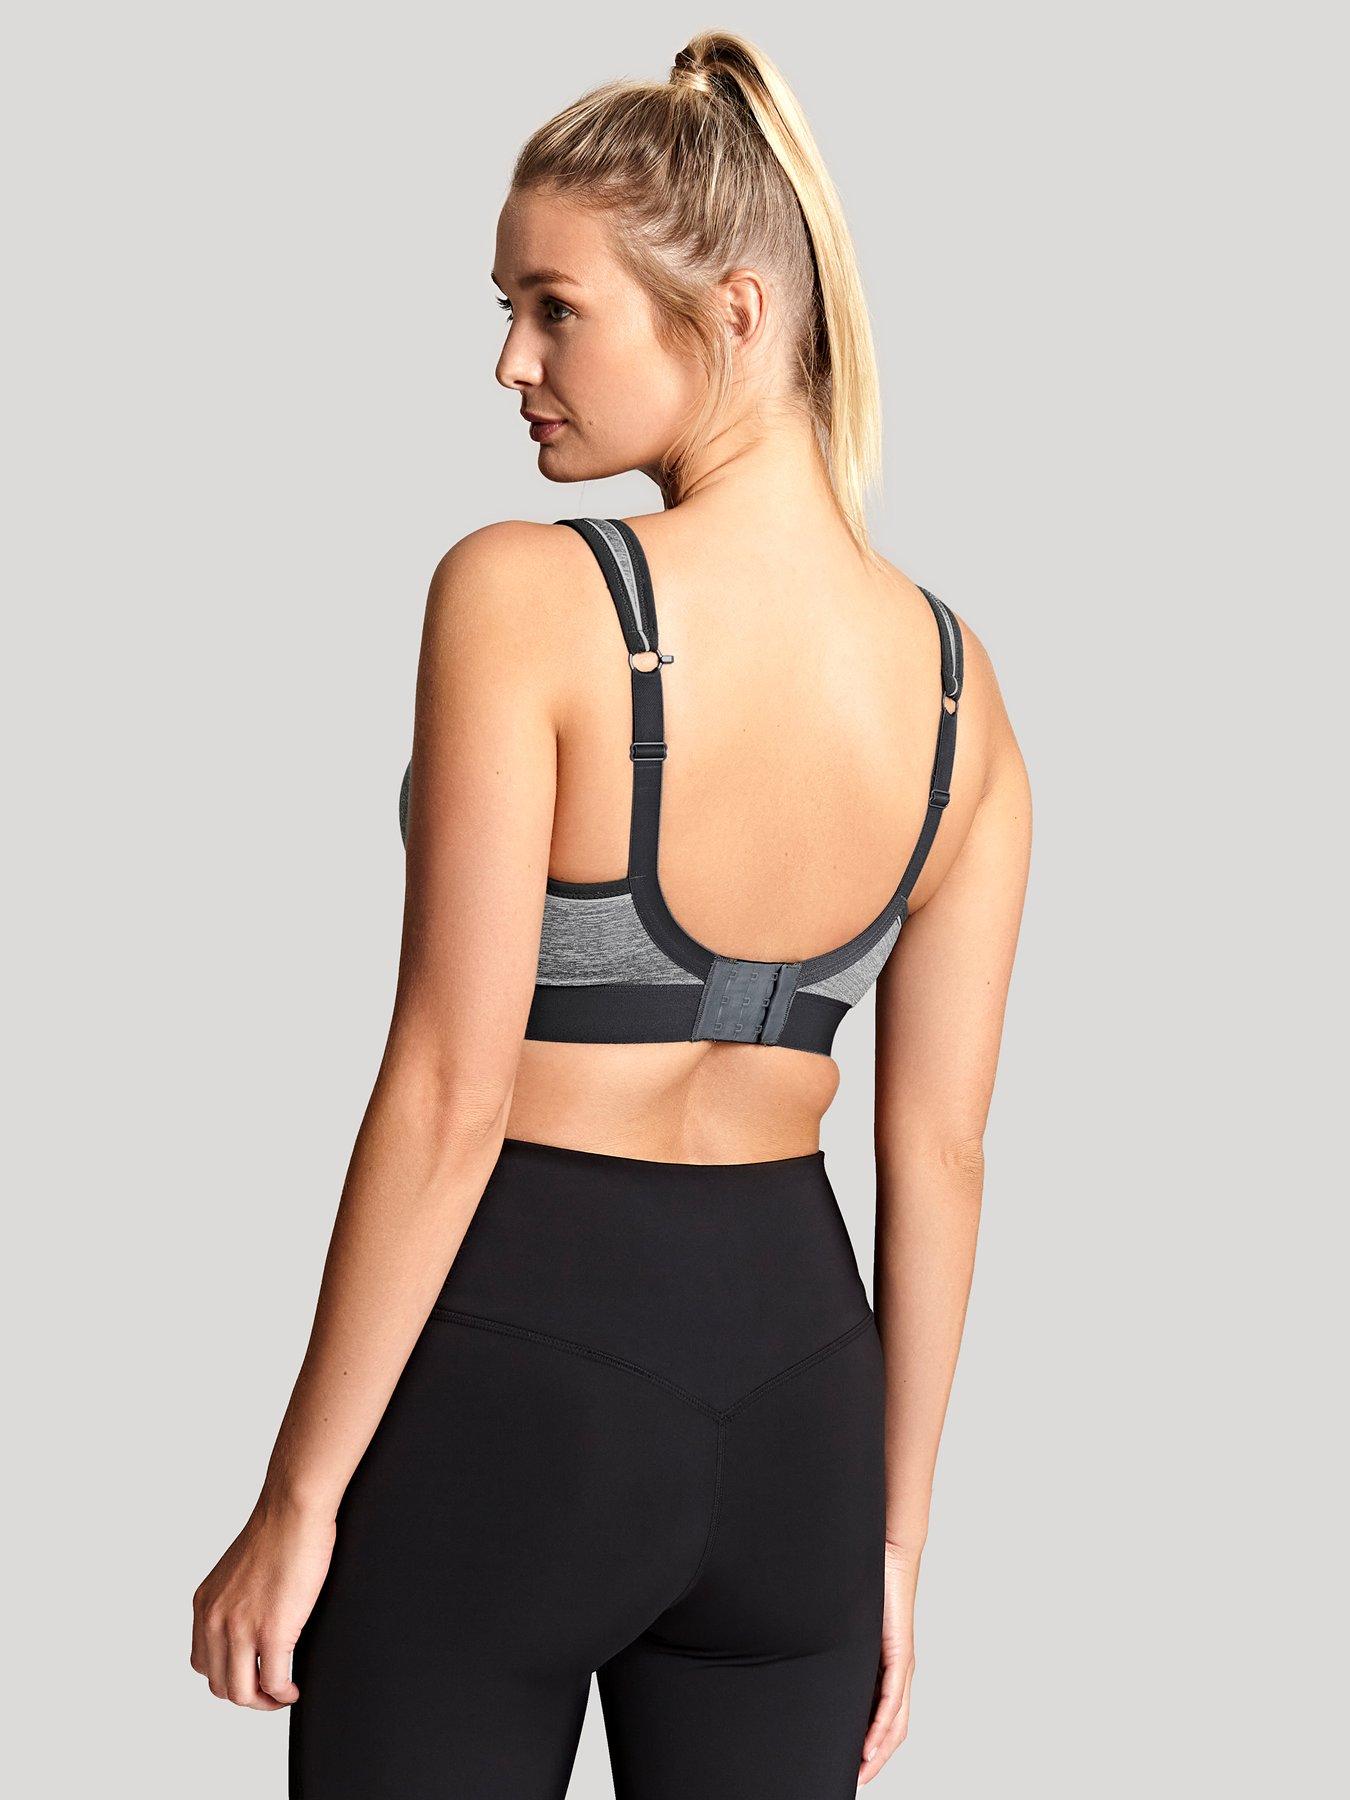  Non Wired Sports Bra - Charcoal Marl